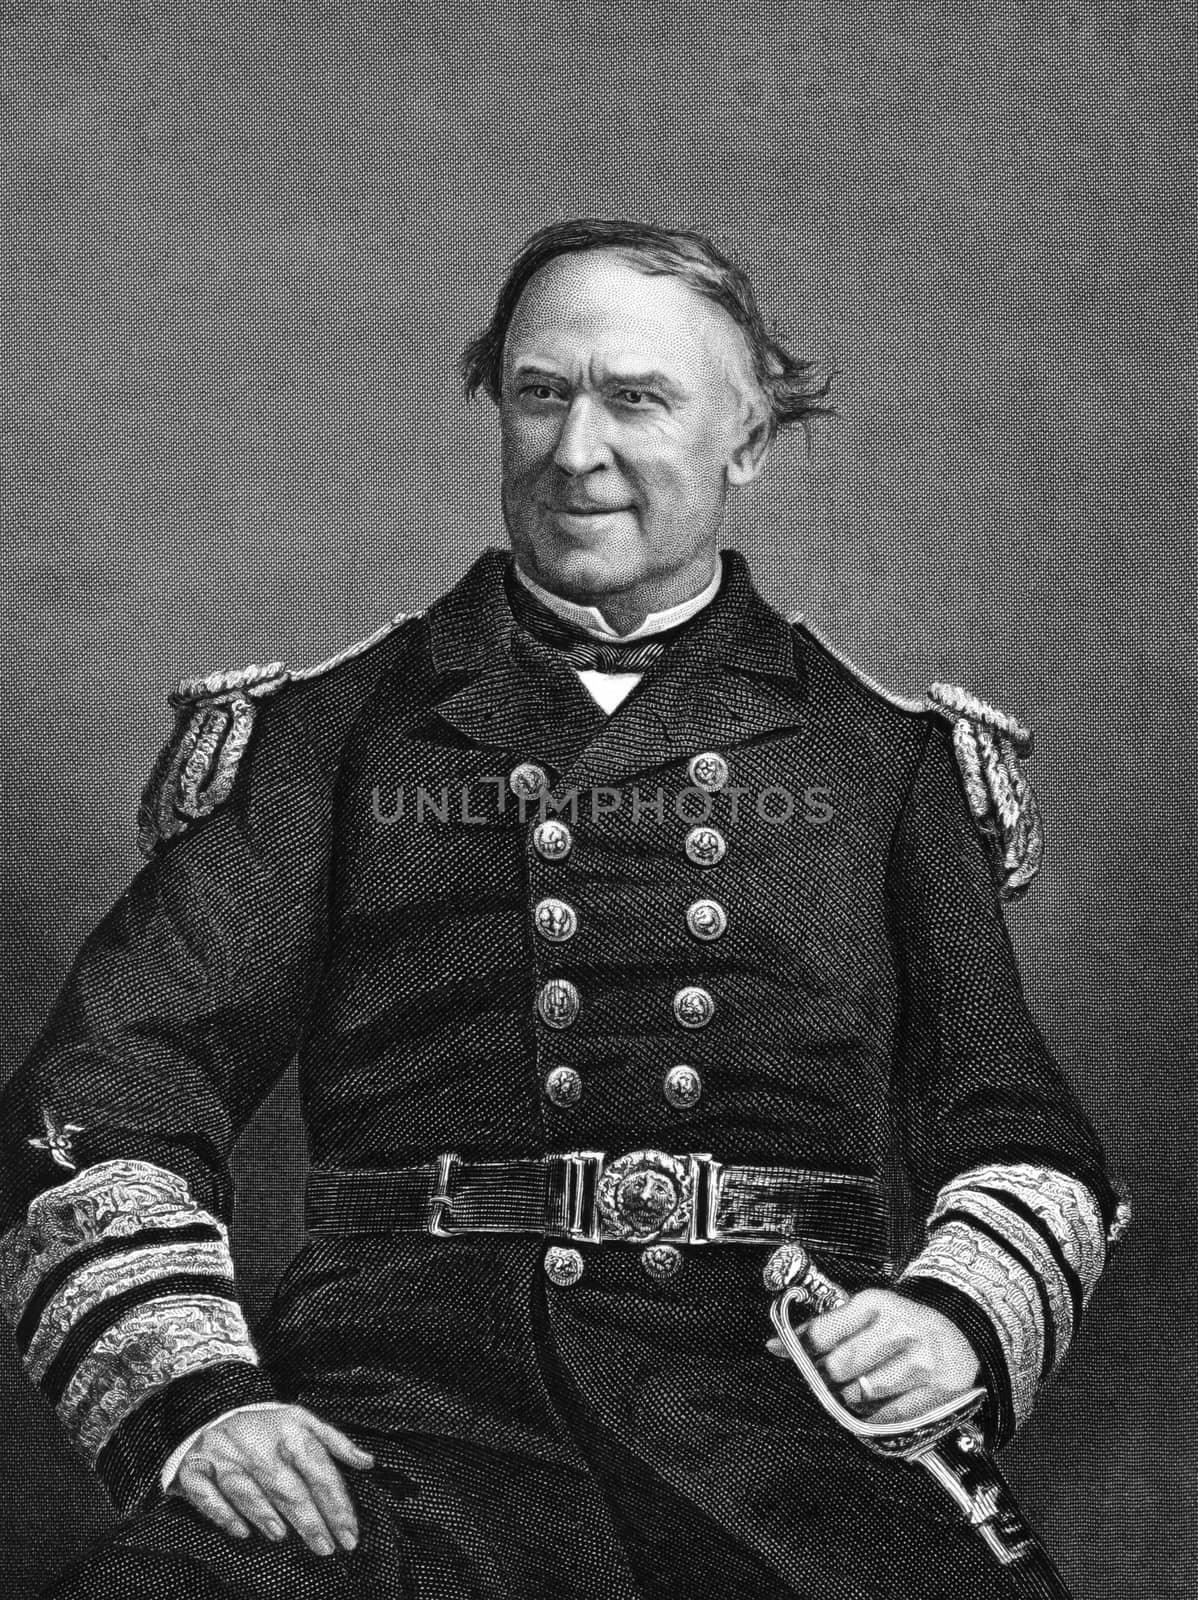 David Farragut (1801-1870) on engraving from 1873. Flag officer of the United States Navy during the American Civil War. Engraved by unknown artist and published in ''Portrait Gallery of Eminent Men and Women with Biographies'',USA,1873.